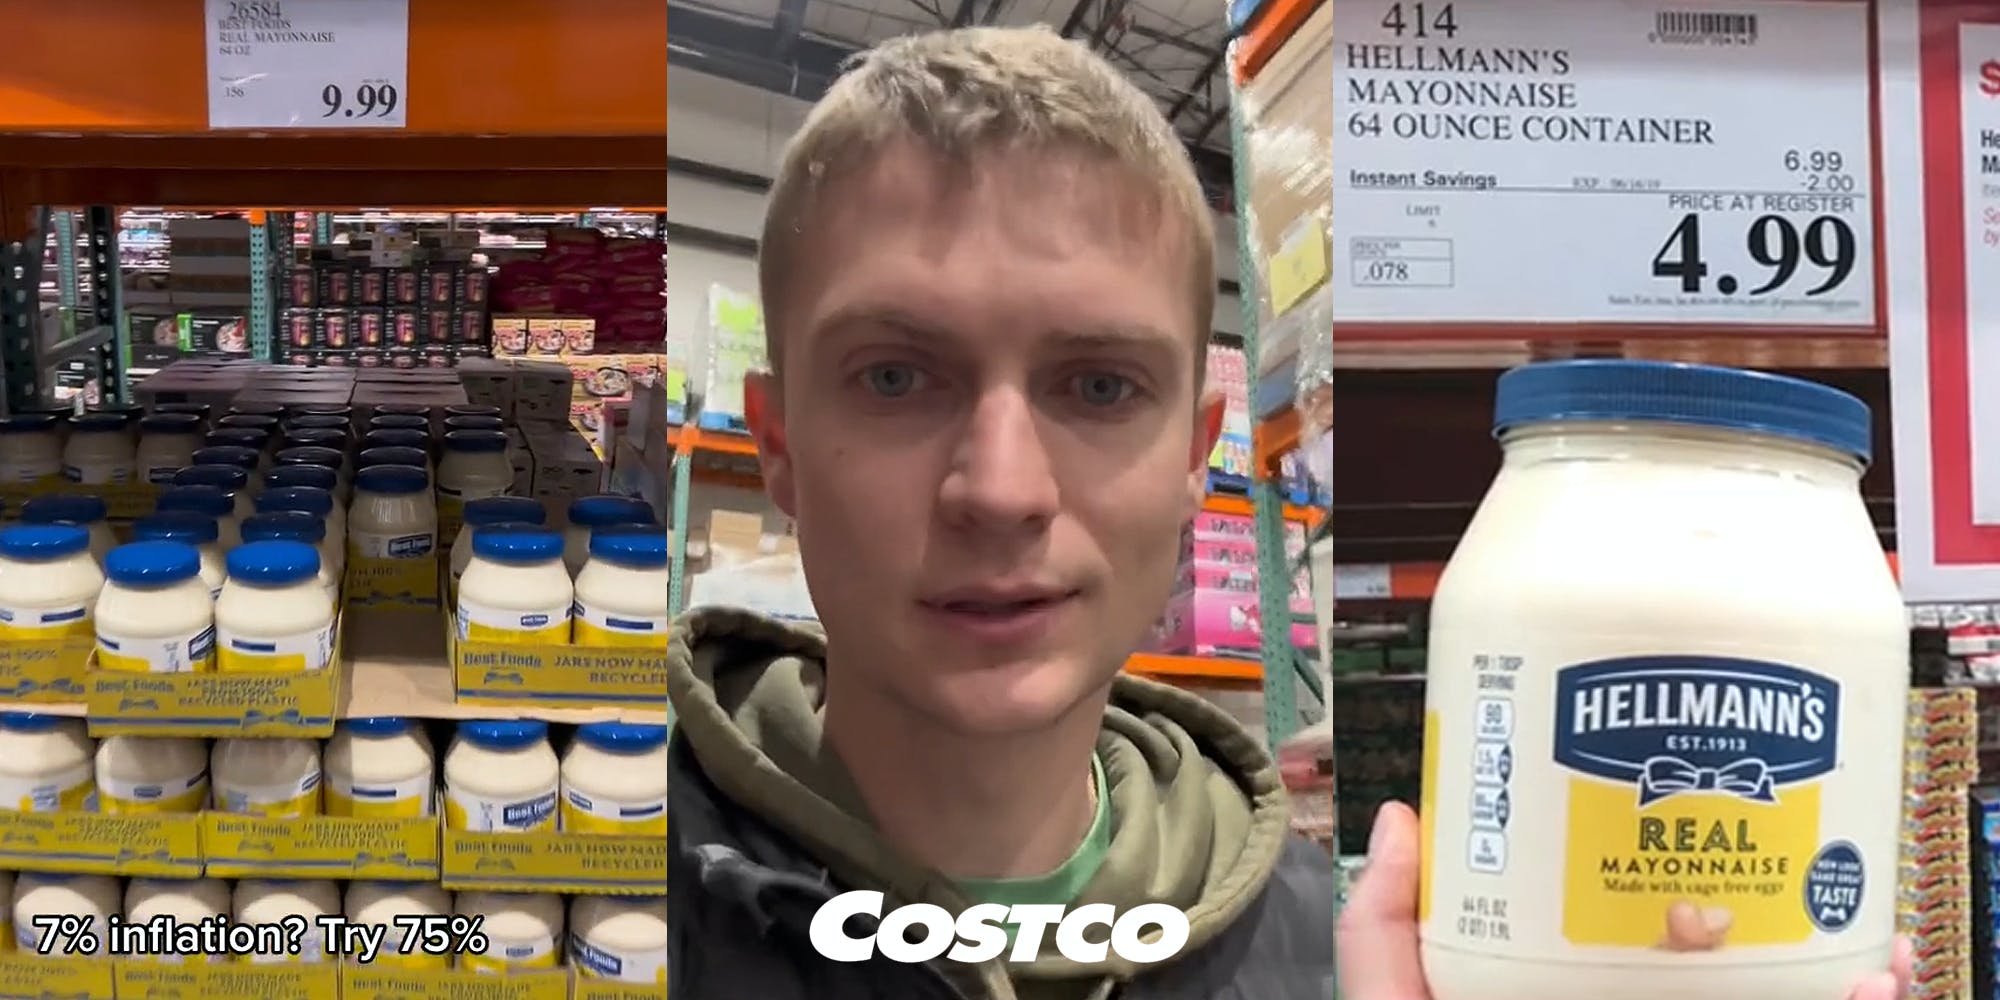 ‘7% inflation? Try 75%’: Costco shopper compares prices of items in store to last year’s prices